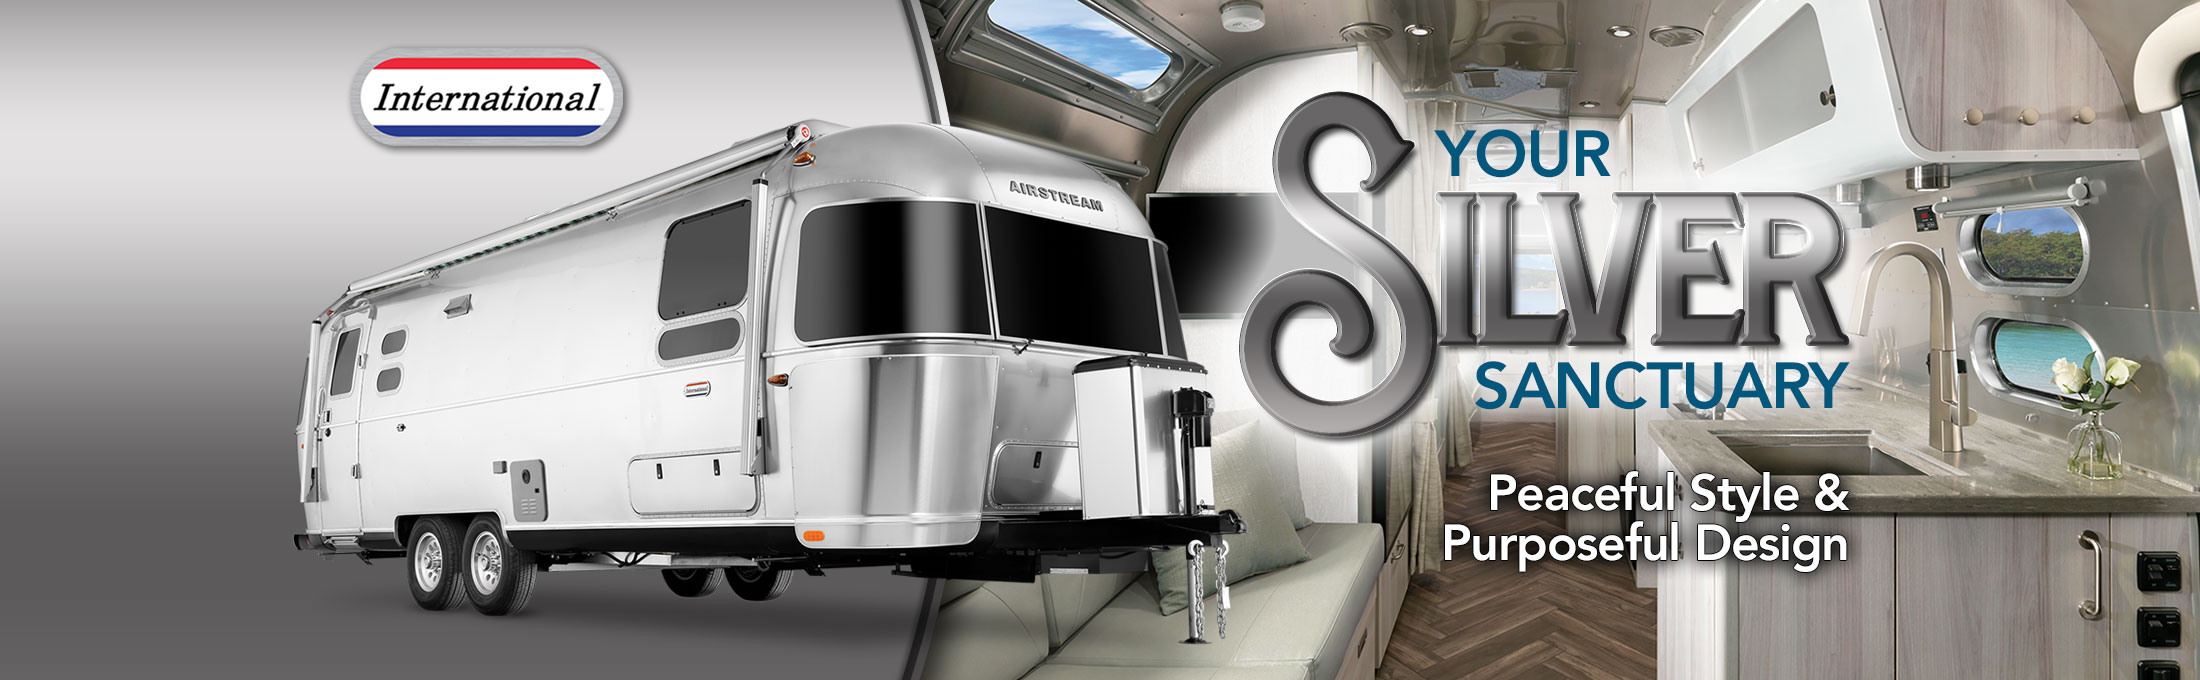 2021 Airstream International. Your silver sanctuary. Peaceful style and purposeful design.